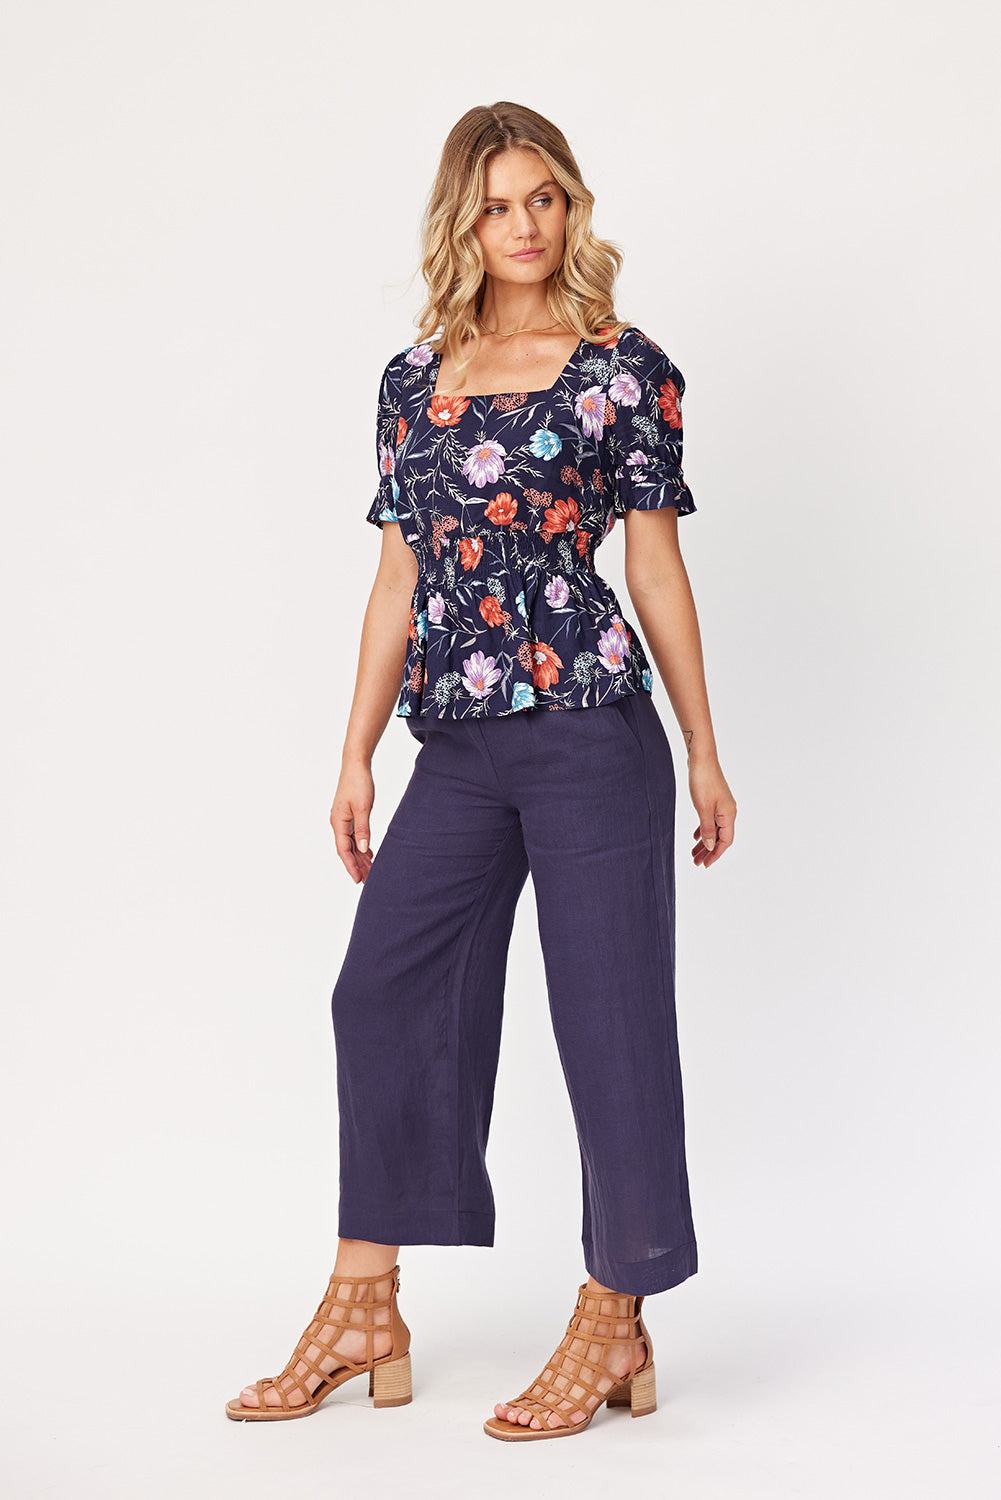 Simmone Top Navy Floral